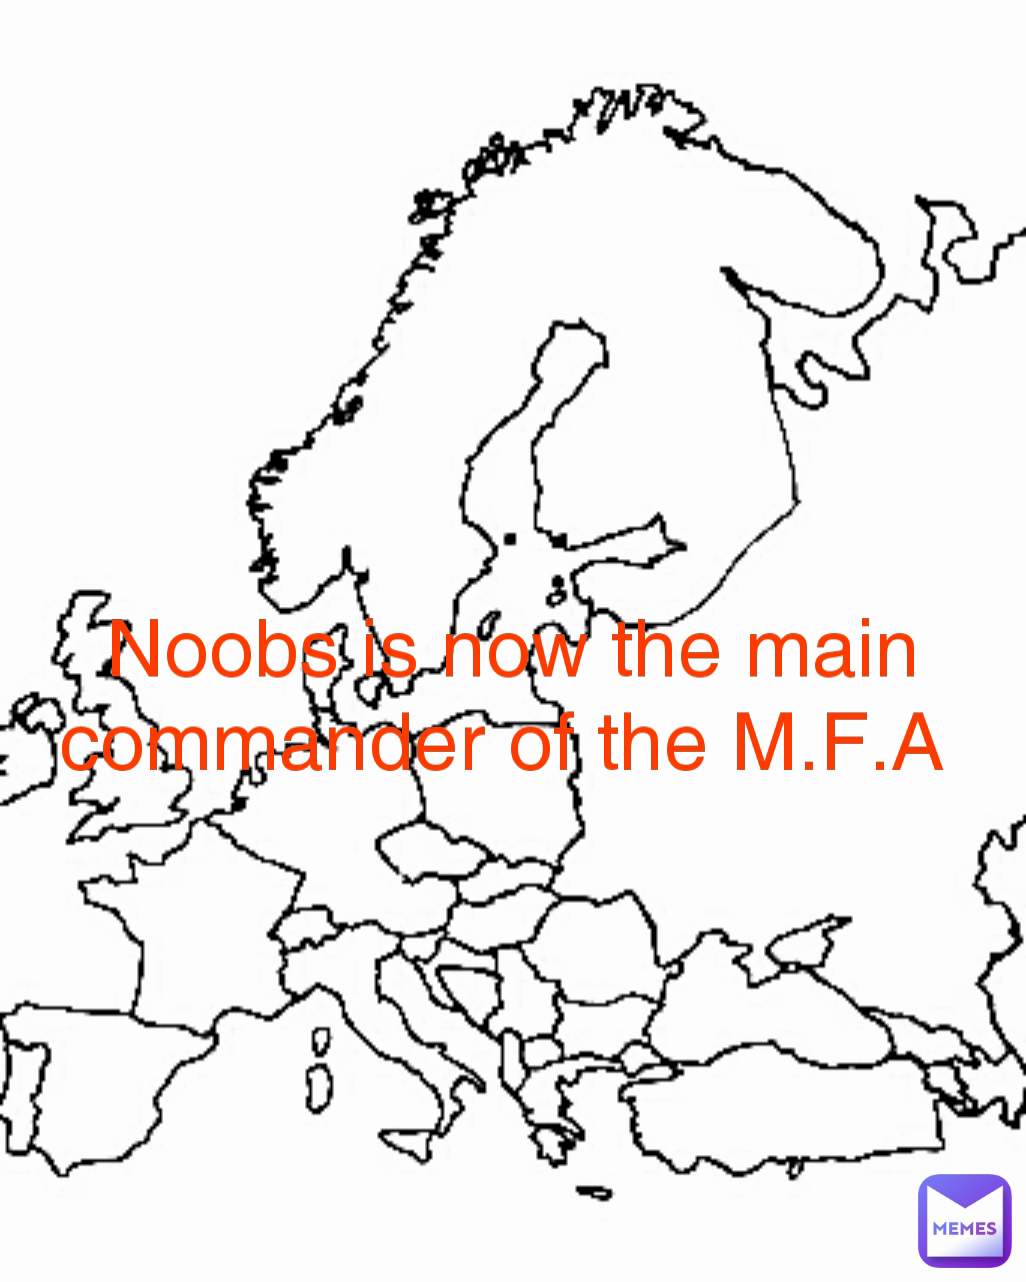 Noobs is now the main commander of the M.F.A 